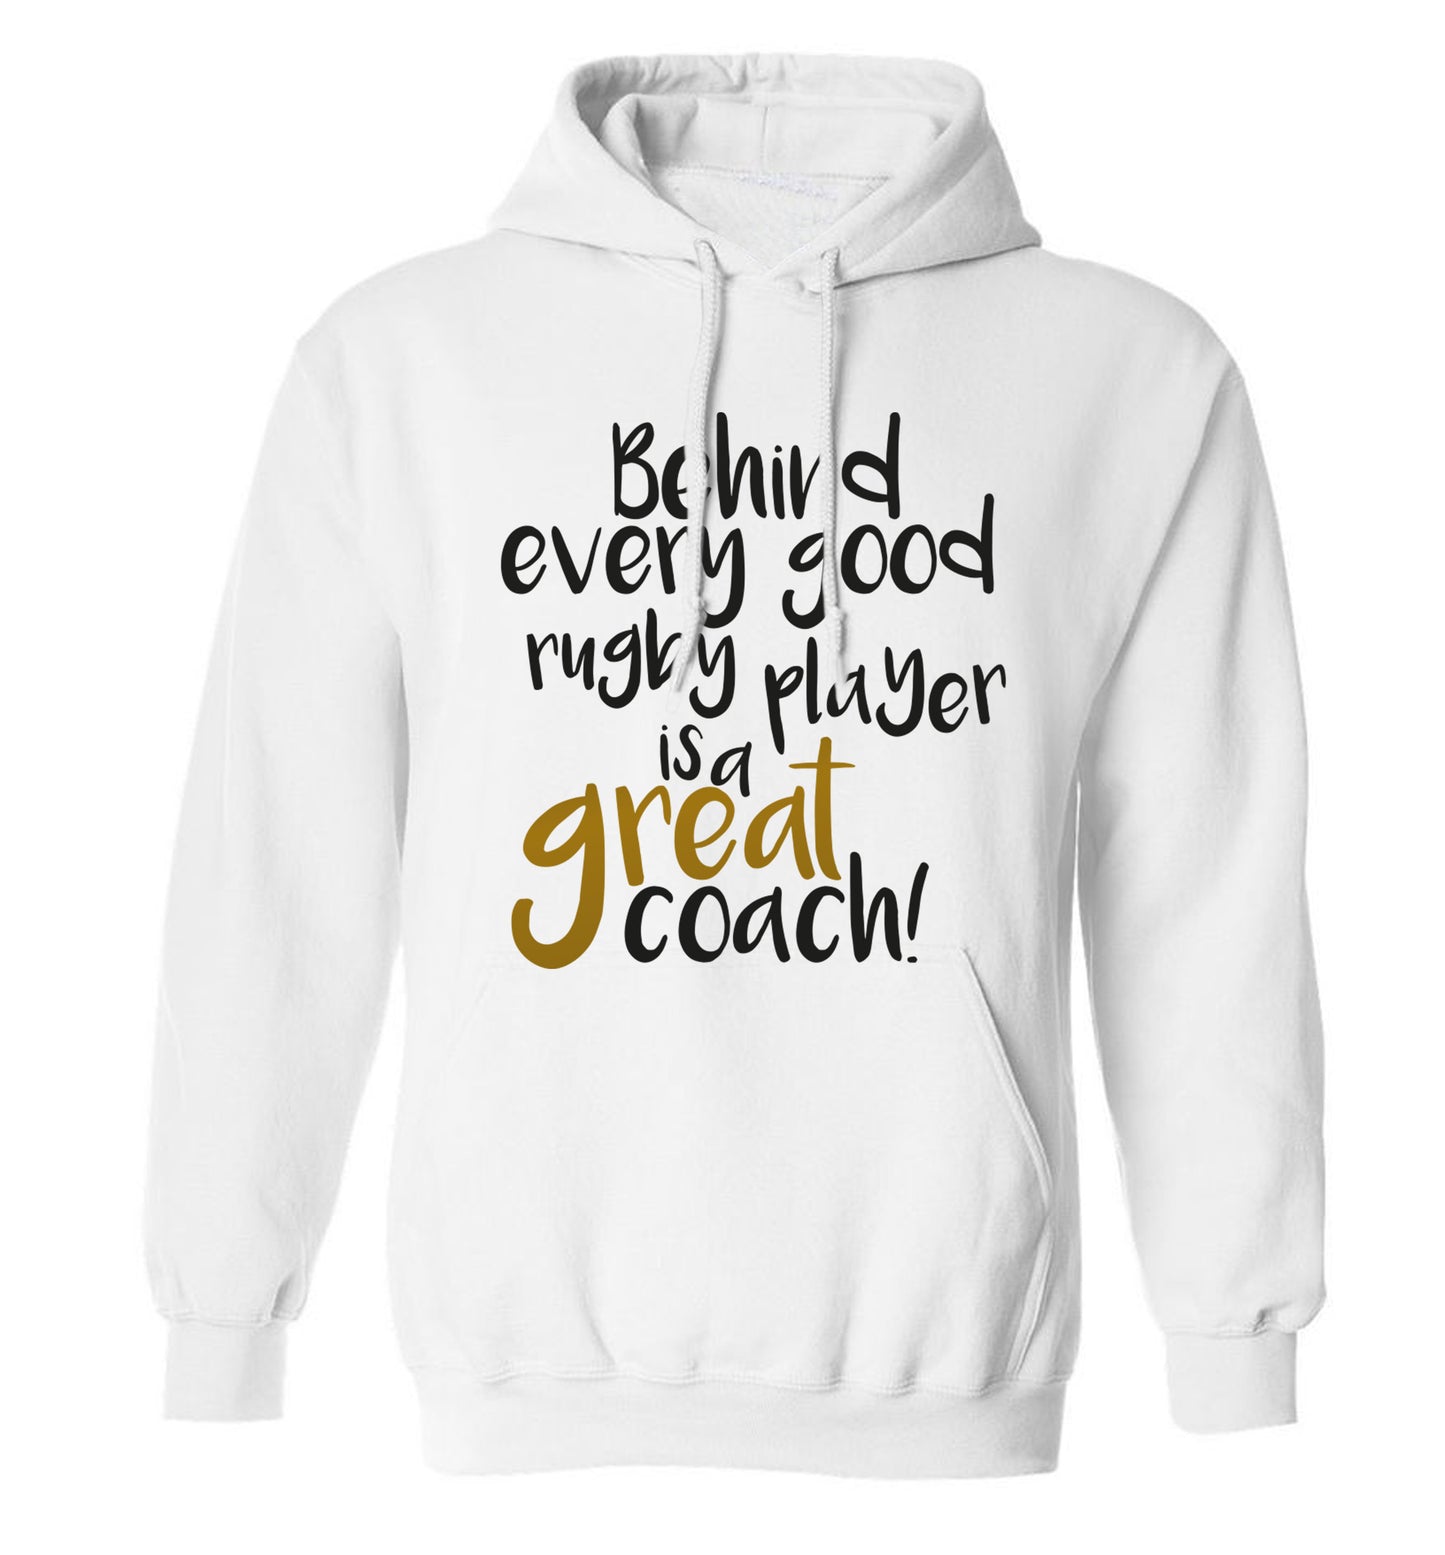 Behind every goor rugby player is a great coach adults unisex white hoodie 2XL